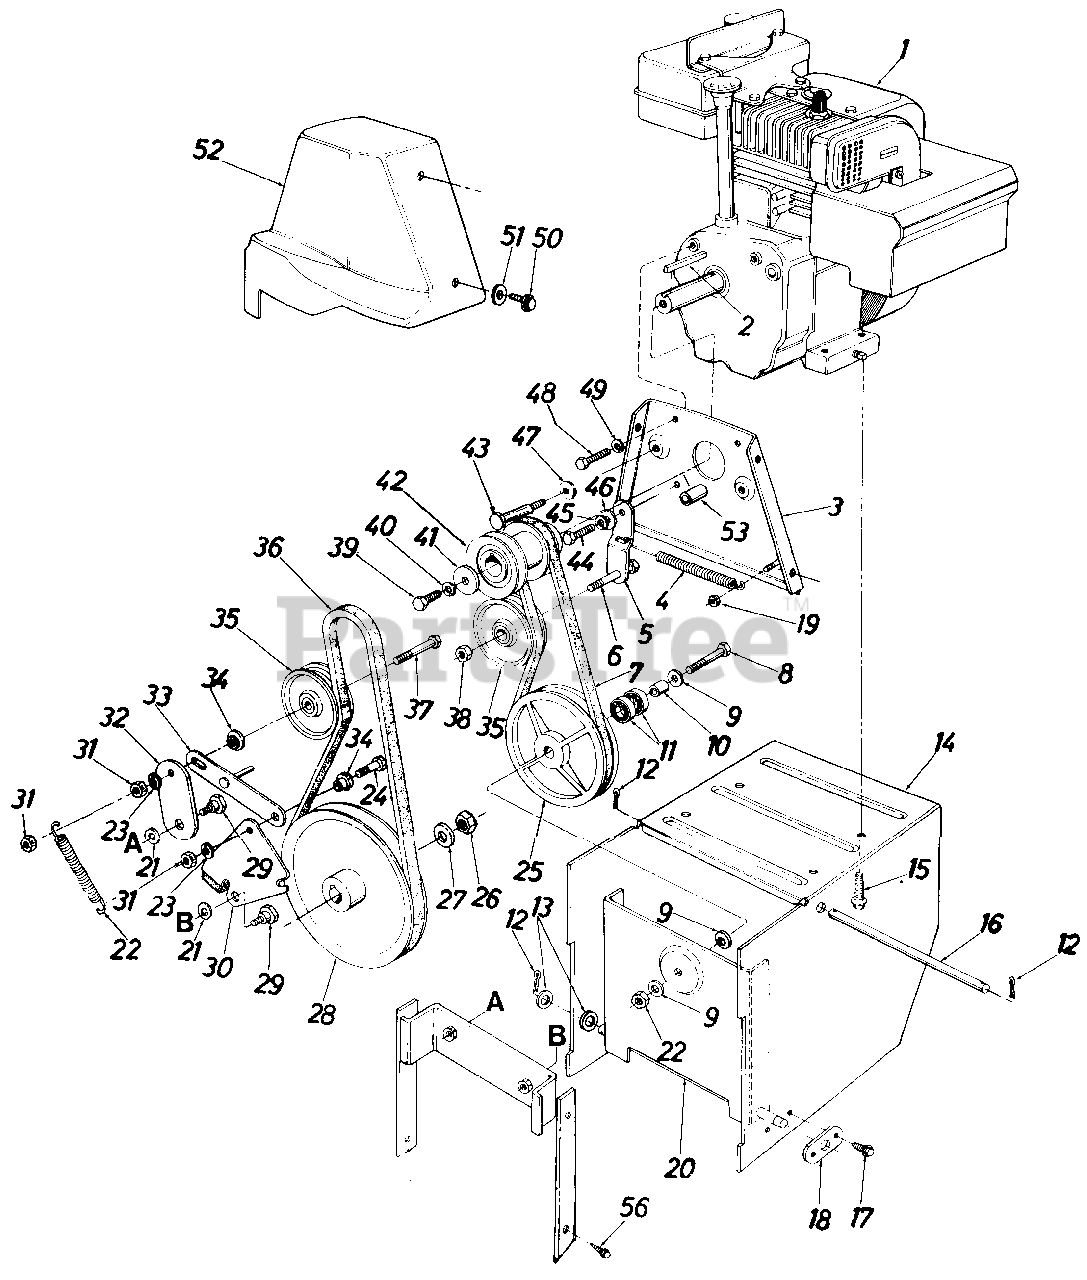 MTD 31353-7 - MTD Snow Thrower (1987) Snow Parts Lookup with Diagrams